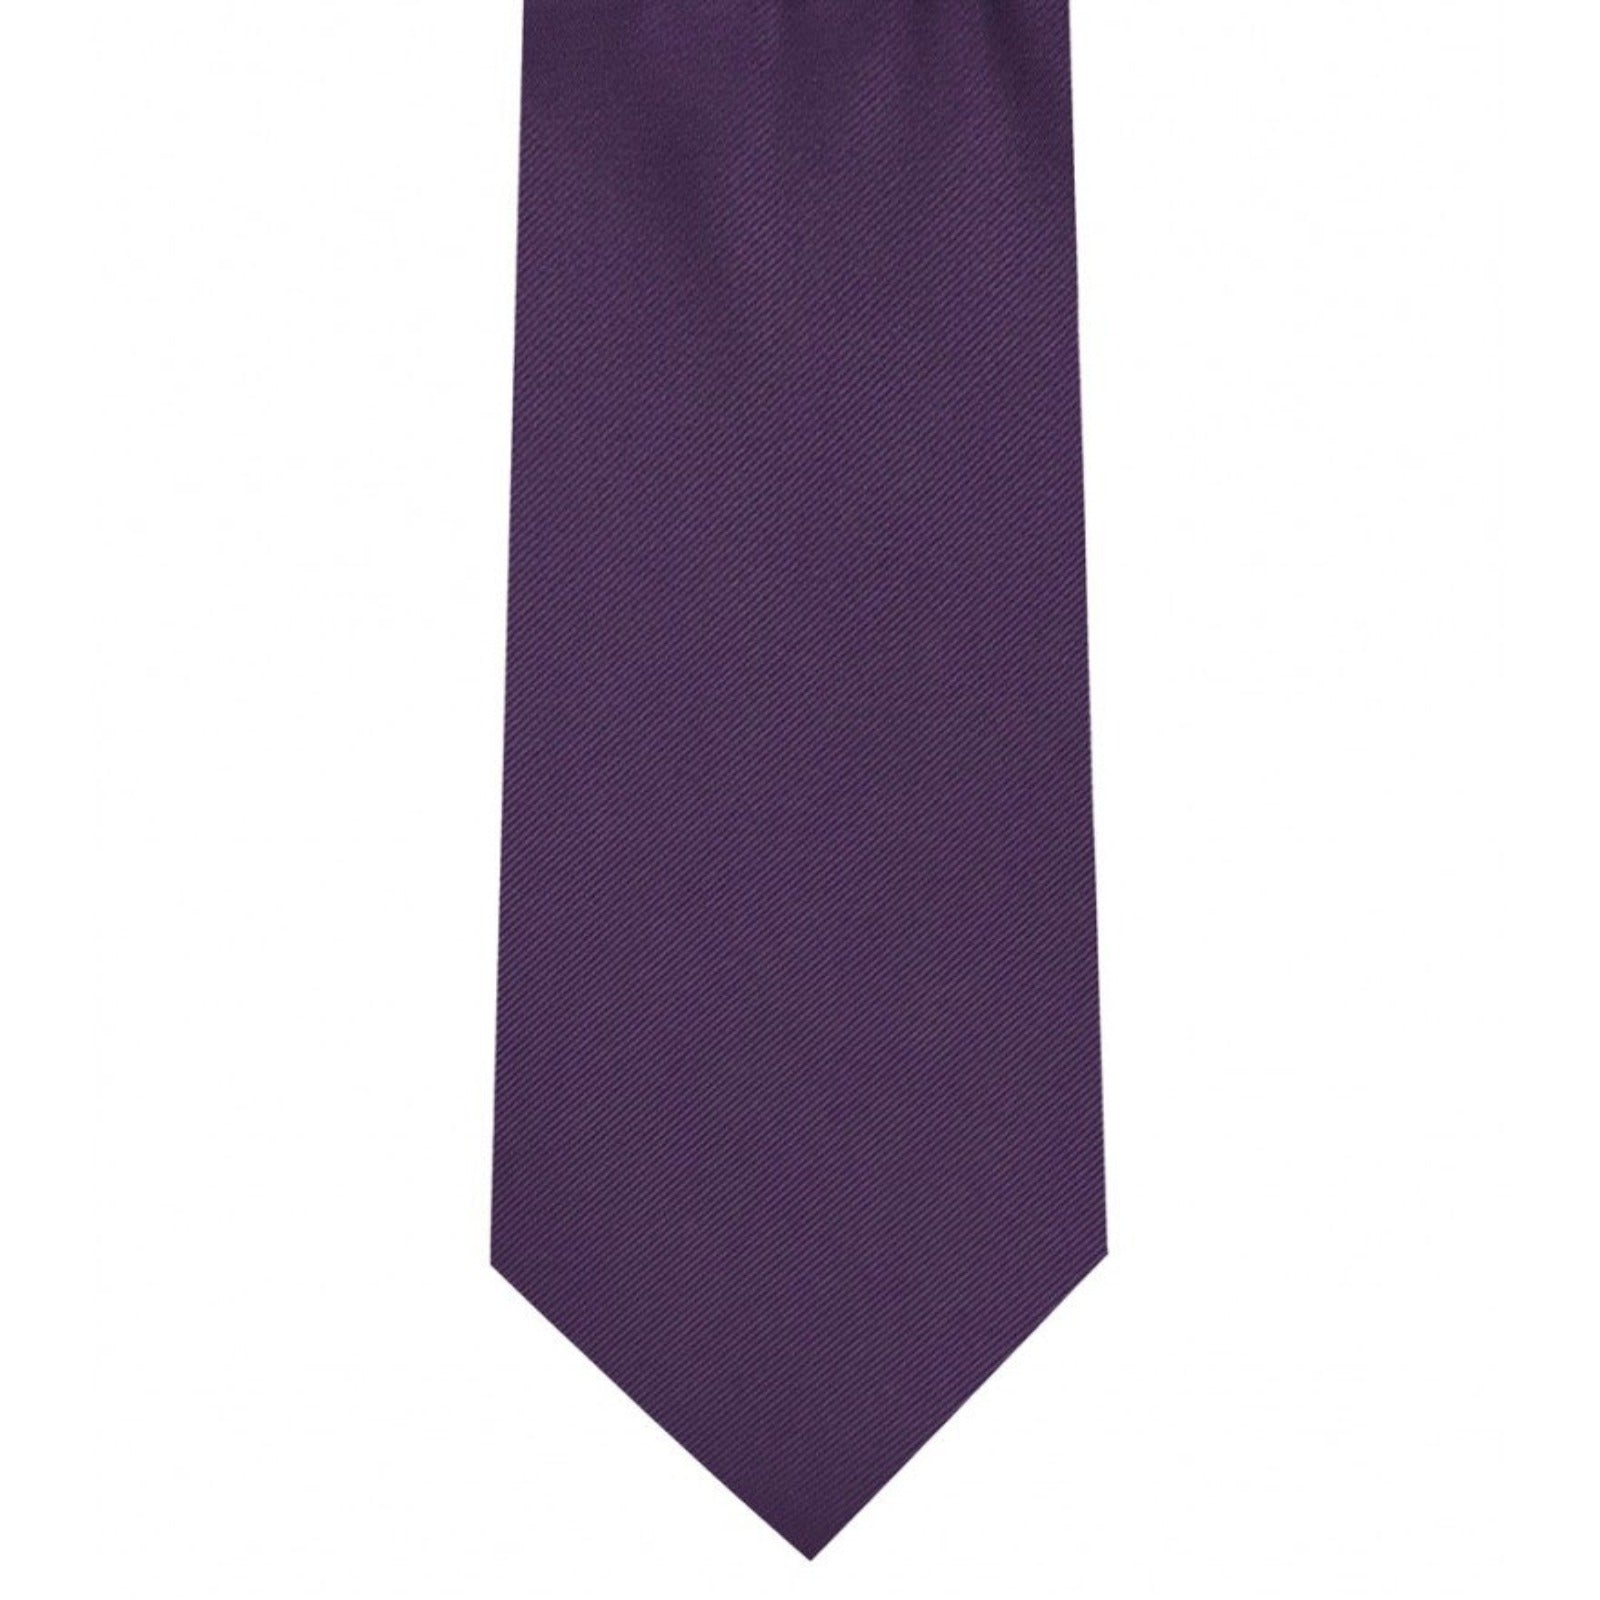 Classic Deep Purple Tie Ultra Skinny tie width 2.25 inches With Matching Pocket Square | KCT Menswear